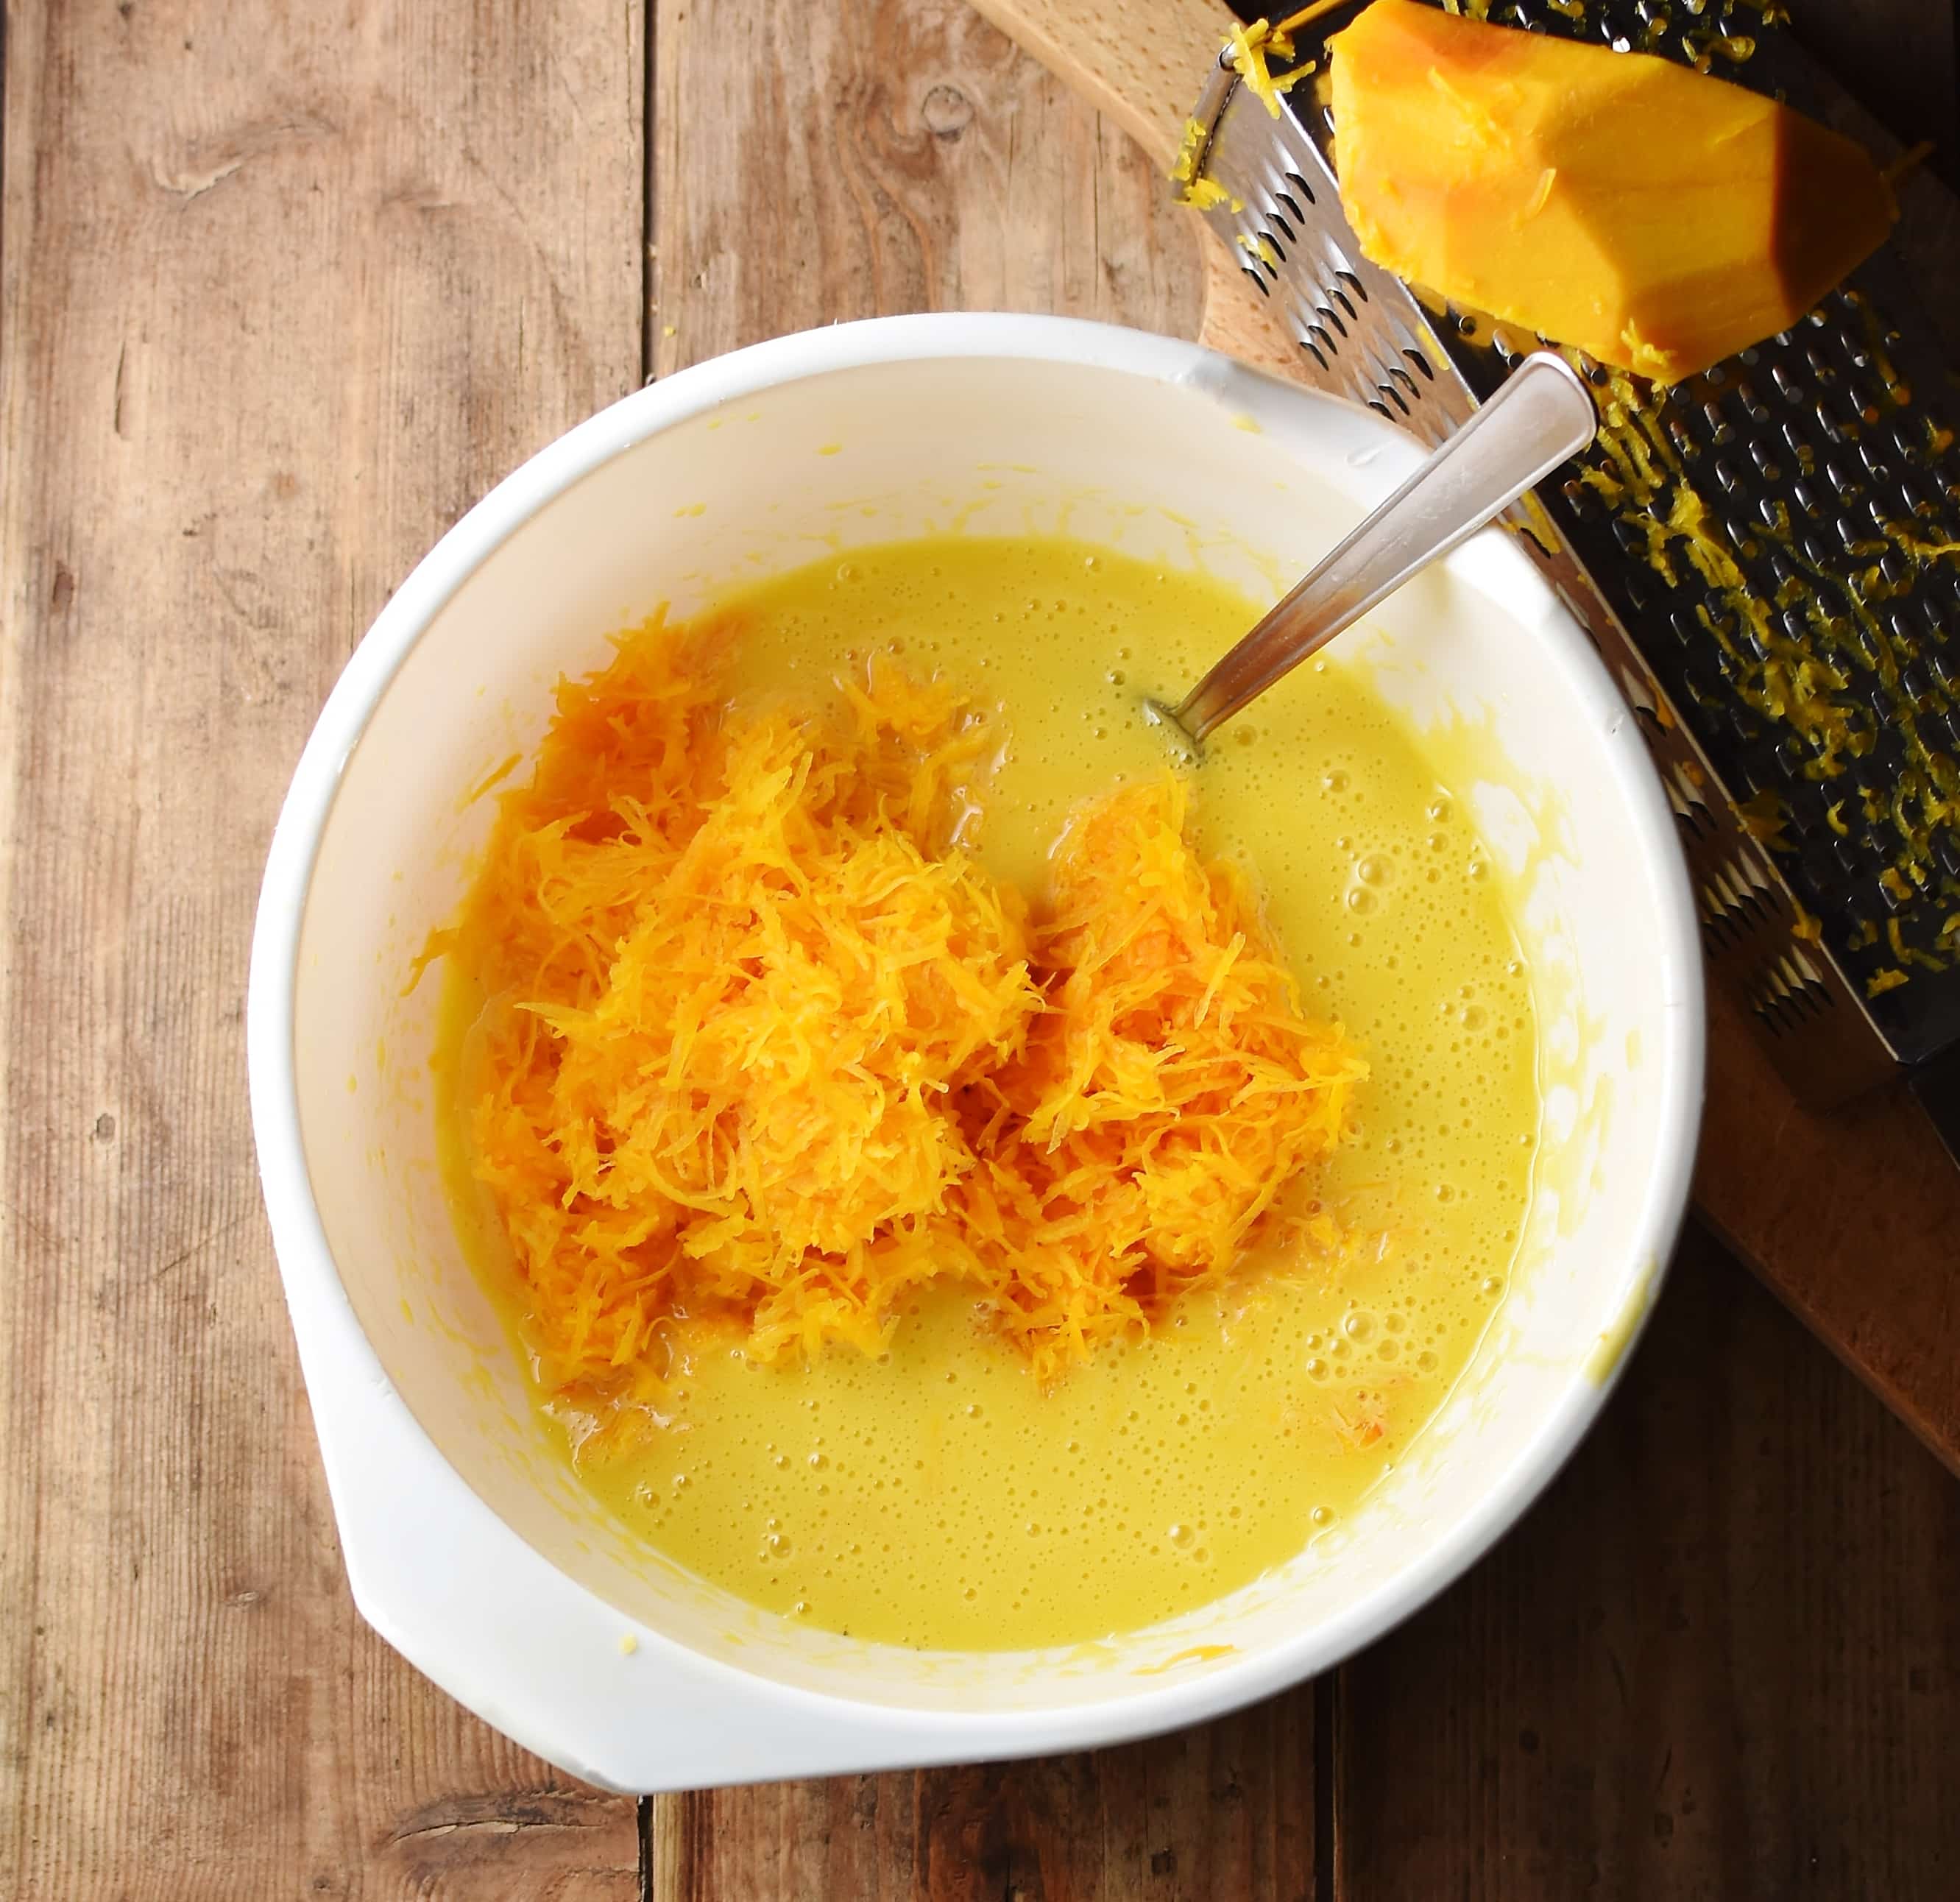 Grated pumpkin and egg mixture in large white bowl with spoon, and grater with pumpkin piece in top right.